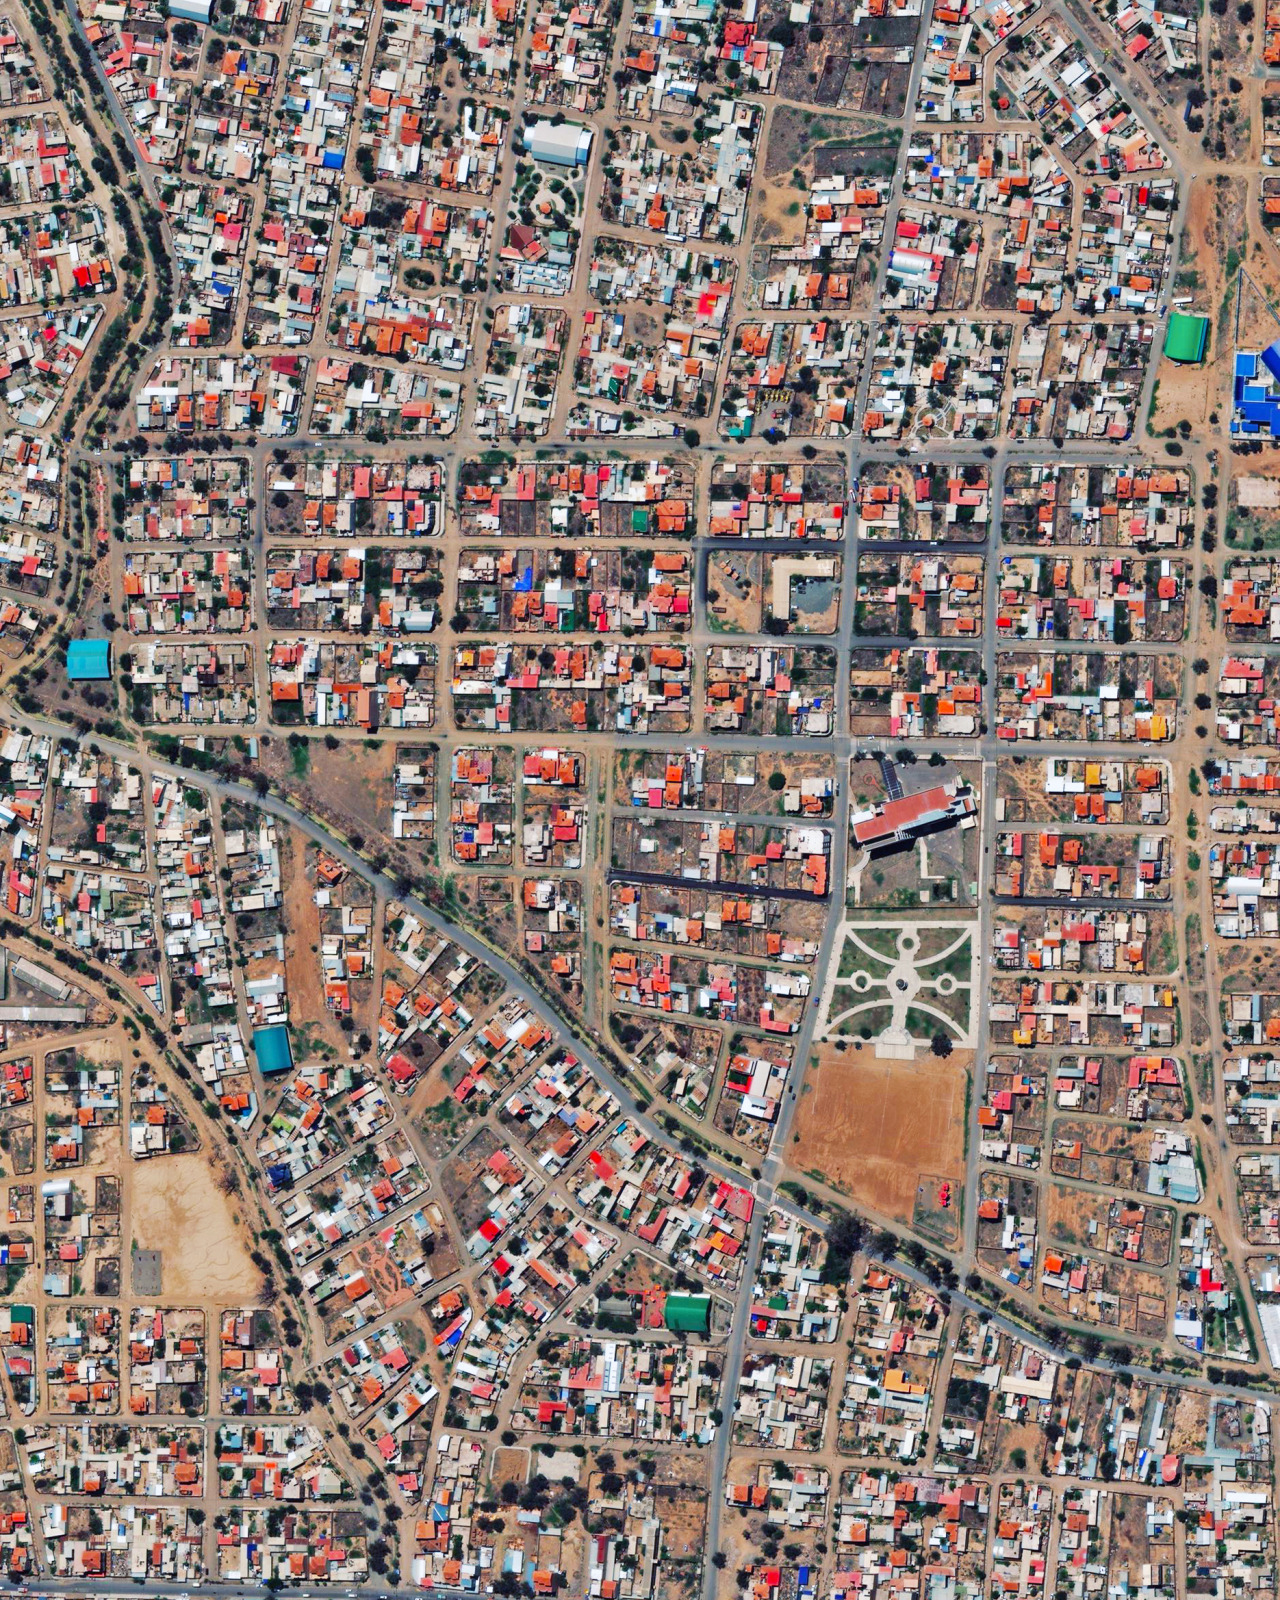 Cochabamba is a city in central Bolivia with roughly 630,000 residents — the nation’s fourth most populous municipality. Like other large cities in the Andean highlands of South America, Cochabamba is a city of contrasts. Its central districts (shown...